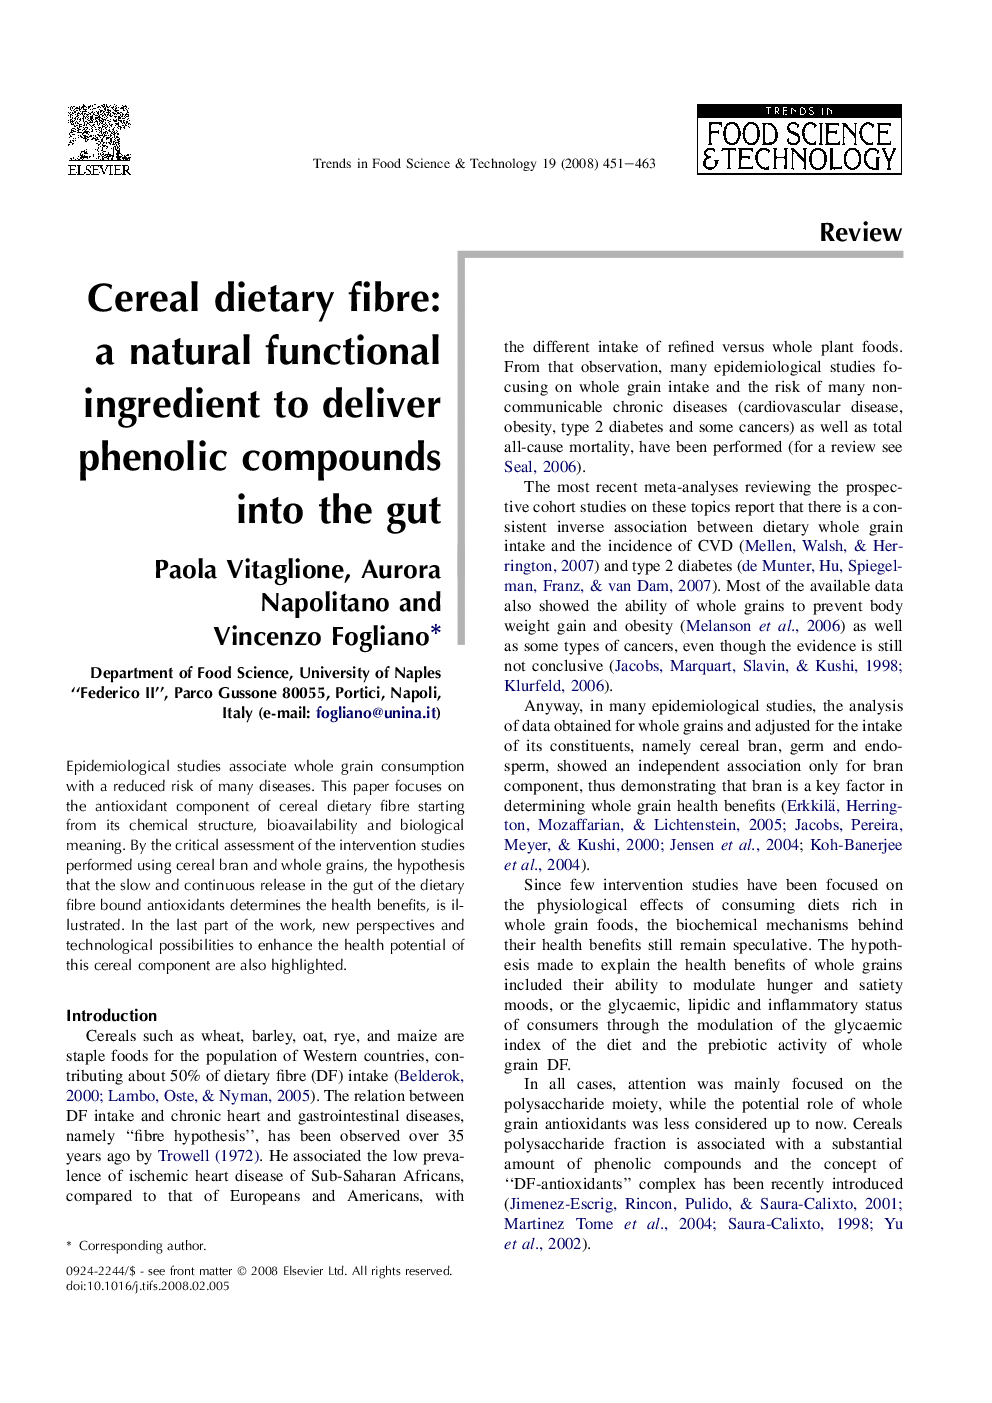 Cereal dietary fibre: a natural functional ingredient to deliver phenolic compounds into the gut